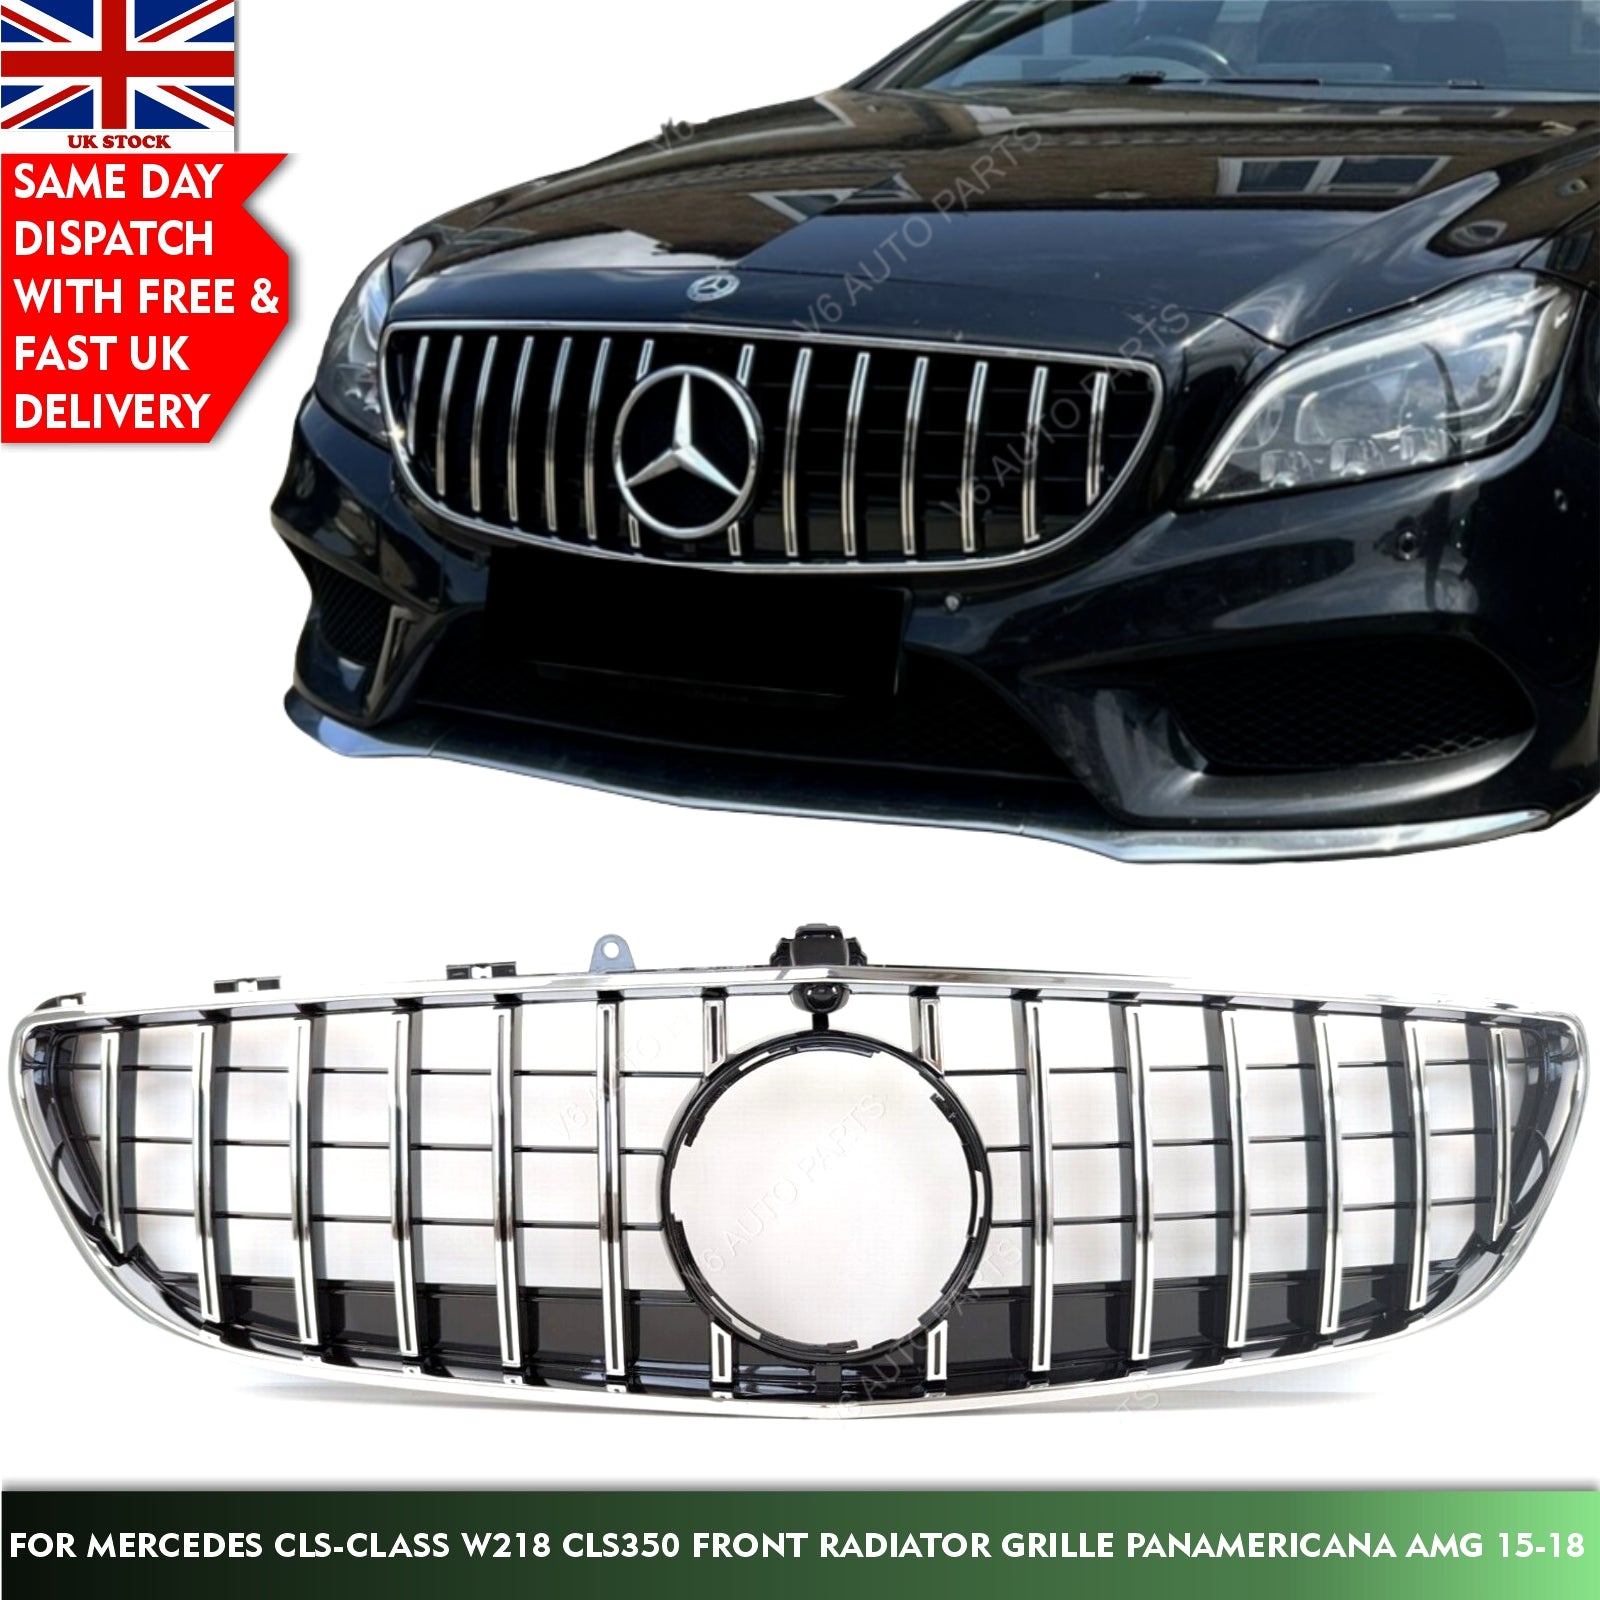 For Mercedes CLS-Class W218 CLS350 Front Radiator Grille Panamericana AMG 15-18